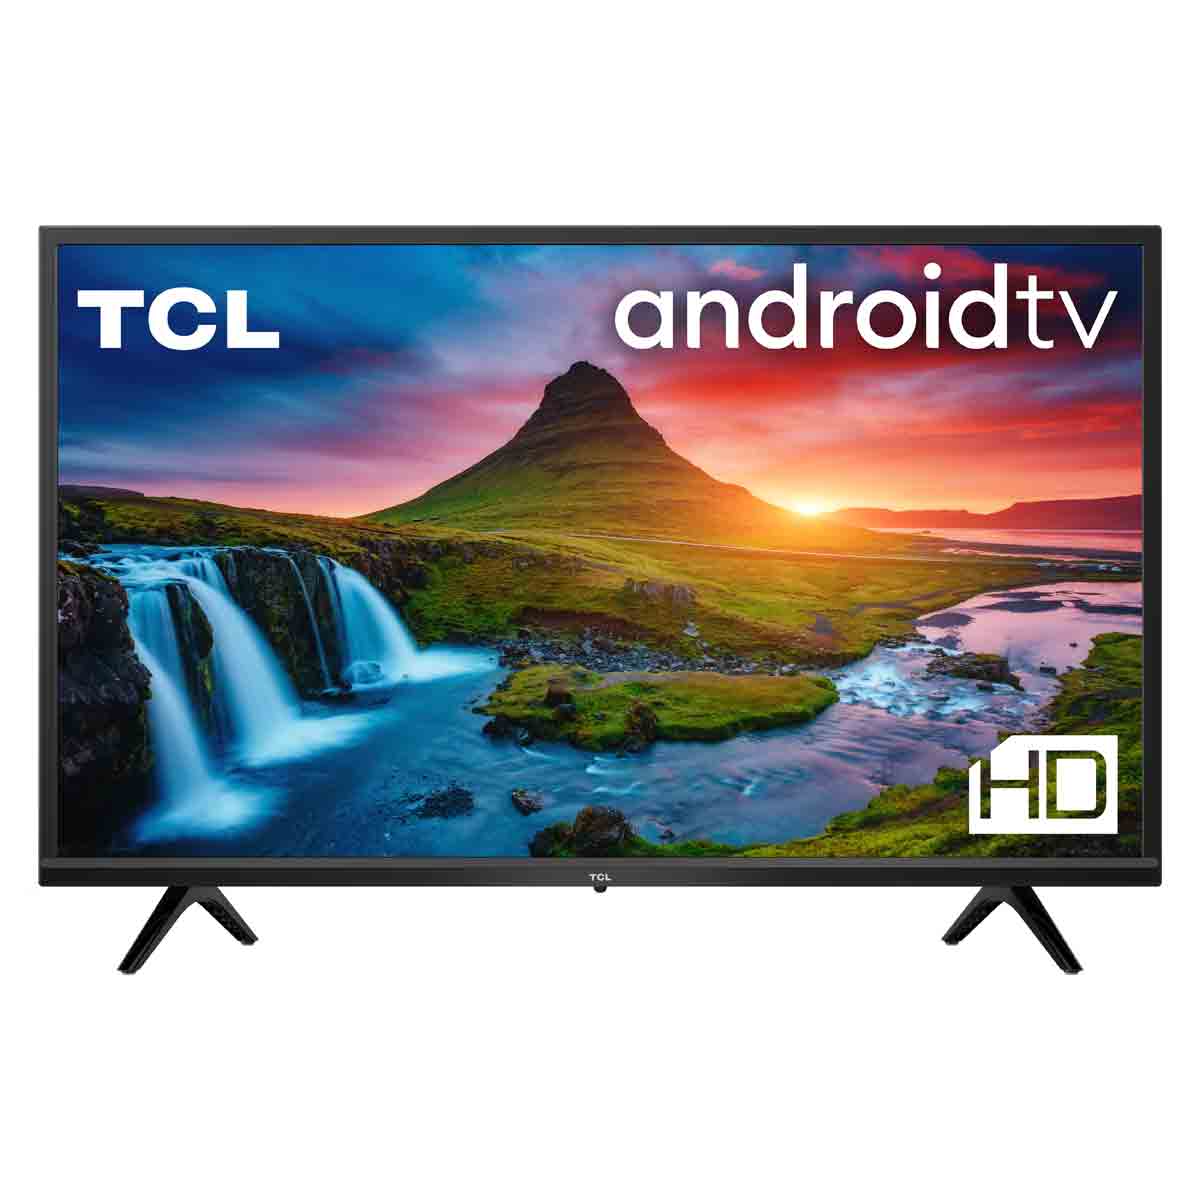 TCL 32S5200K Smart Android TV HD